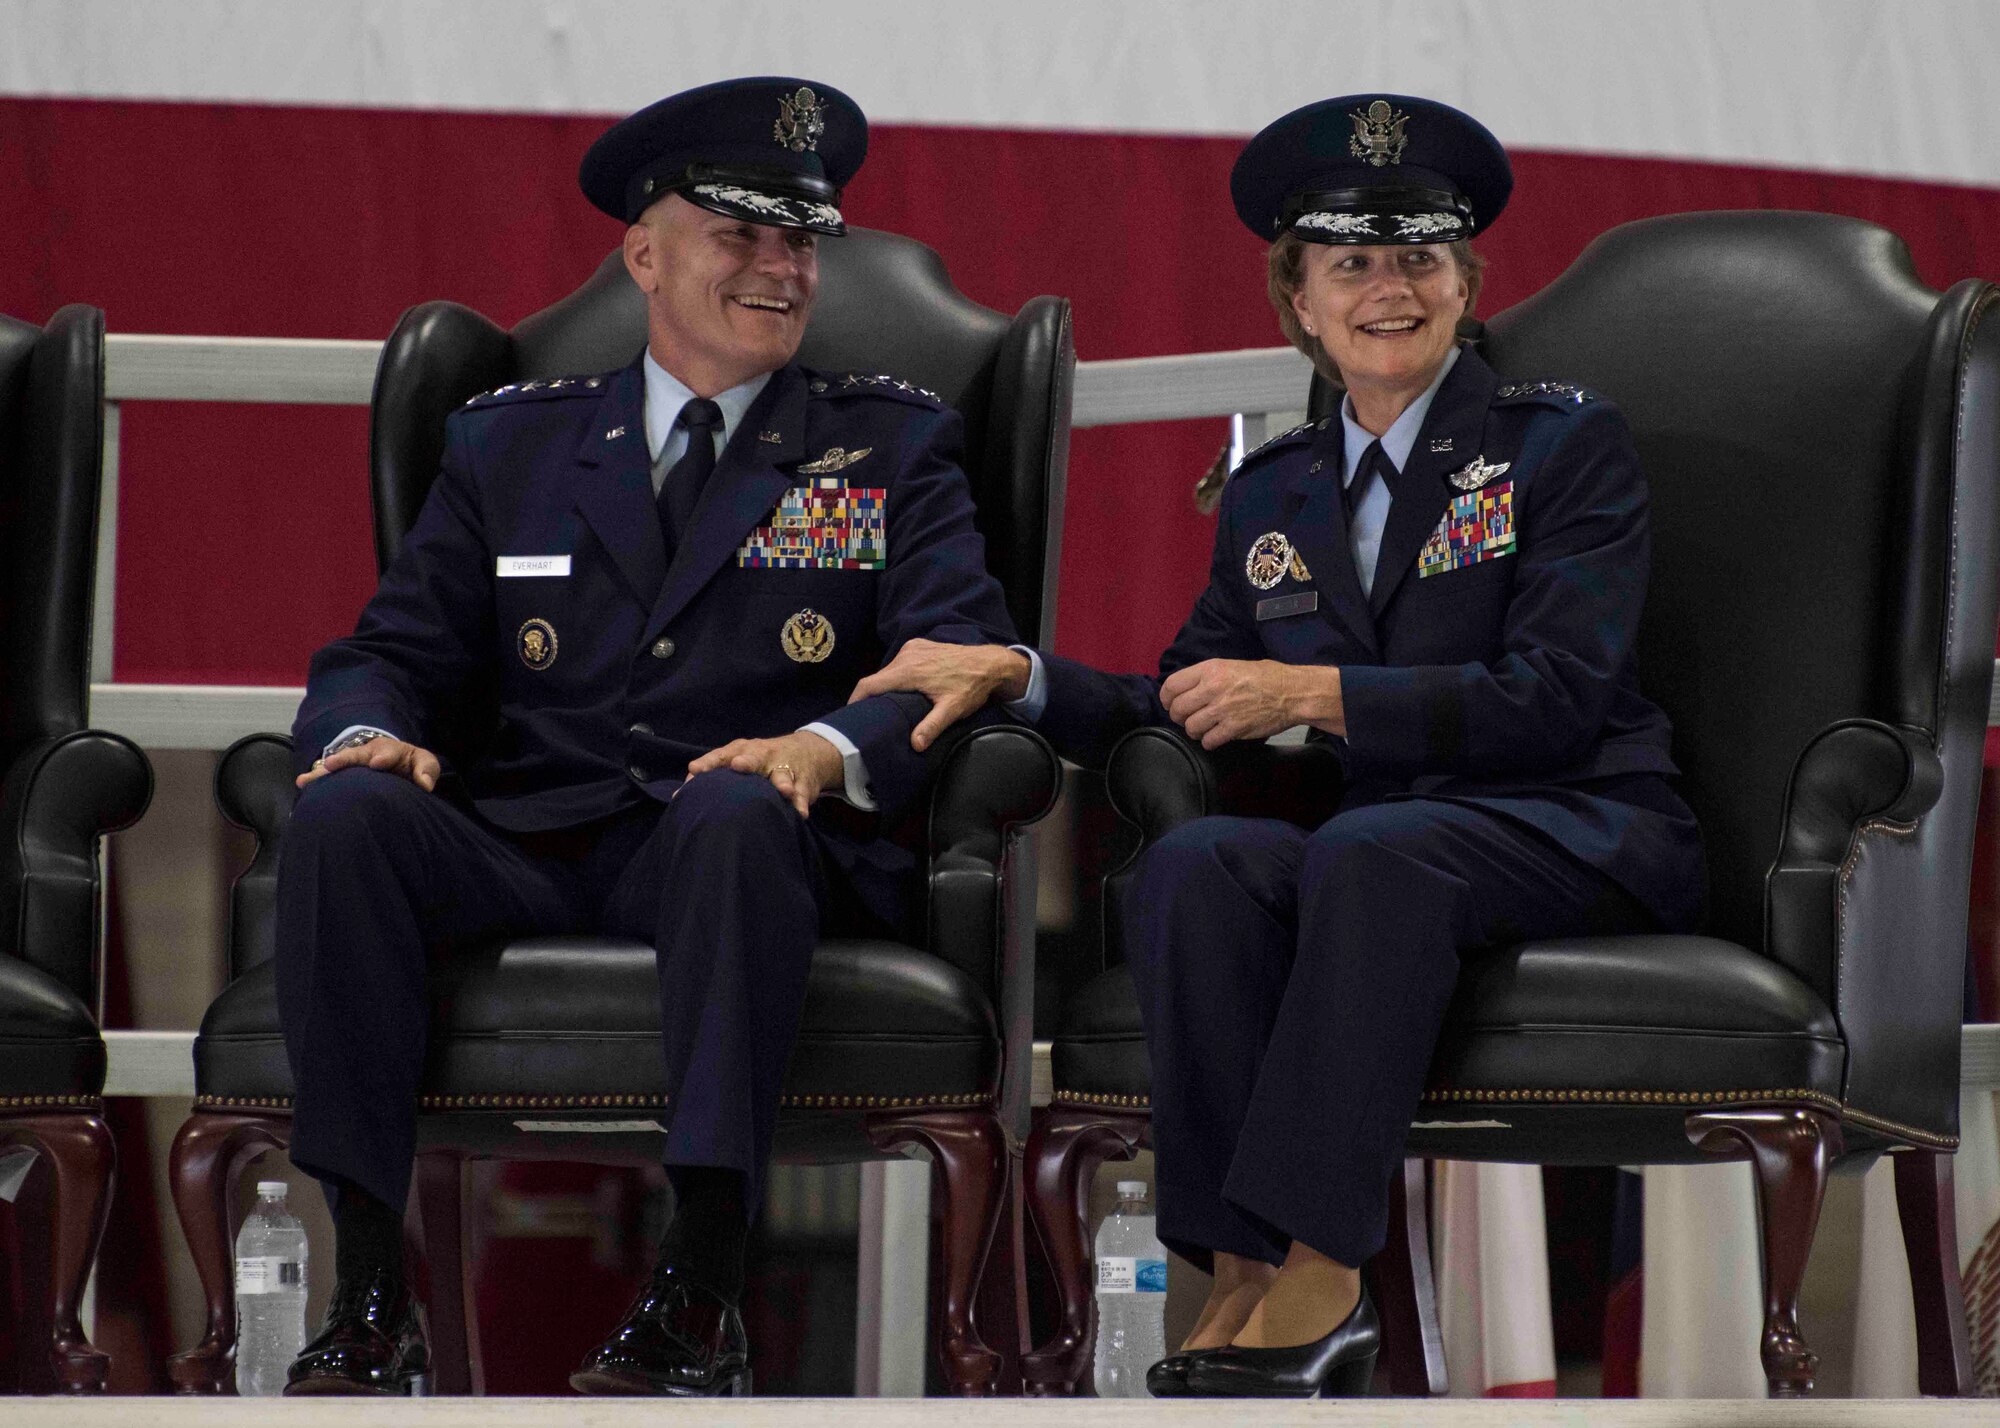 Gen. Carlton D. Everhart II, outgoing Air Mobility Command commander, and Gen. Maryanne Miller, incoming AMC commander, share a moment during the AMC change of command, Scott Air Force Base, Illinois, Sept. 7, 2018. Miller assumed command from Everhart, who retires after 35 years of service to the Air Force. AMC provides rapid, global mobility and sustainment for America's armed forces through airlift, aerial refueling, aeromedical evacuation and mobility support. (U.S. Air Force photo by Tech. Sgt. Jodi Martinez)